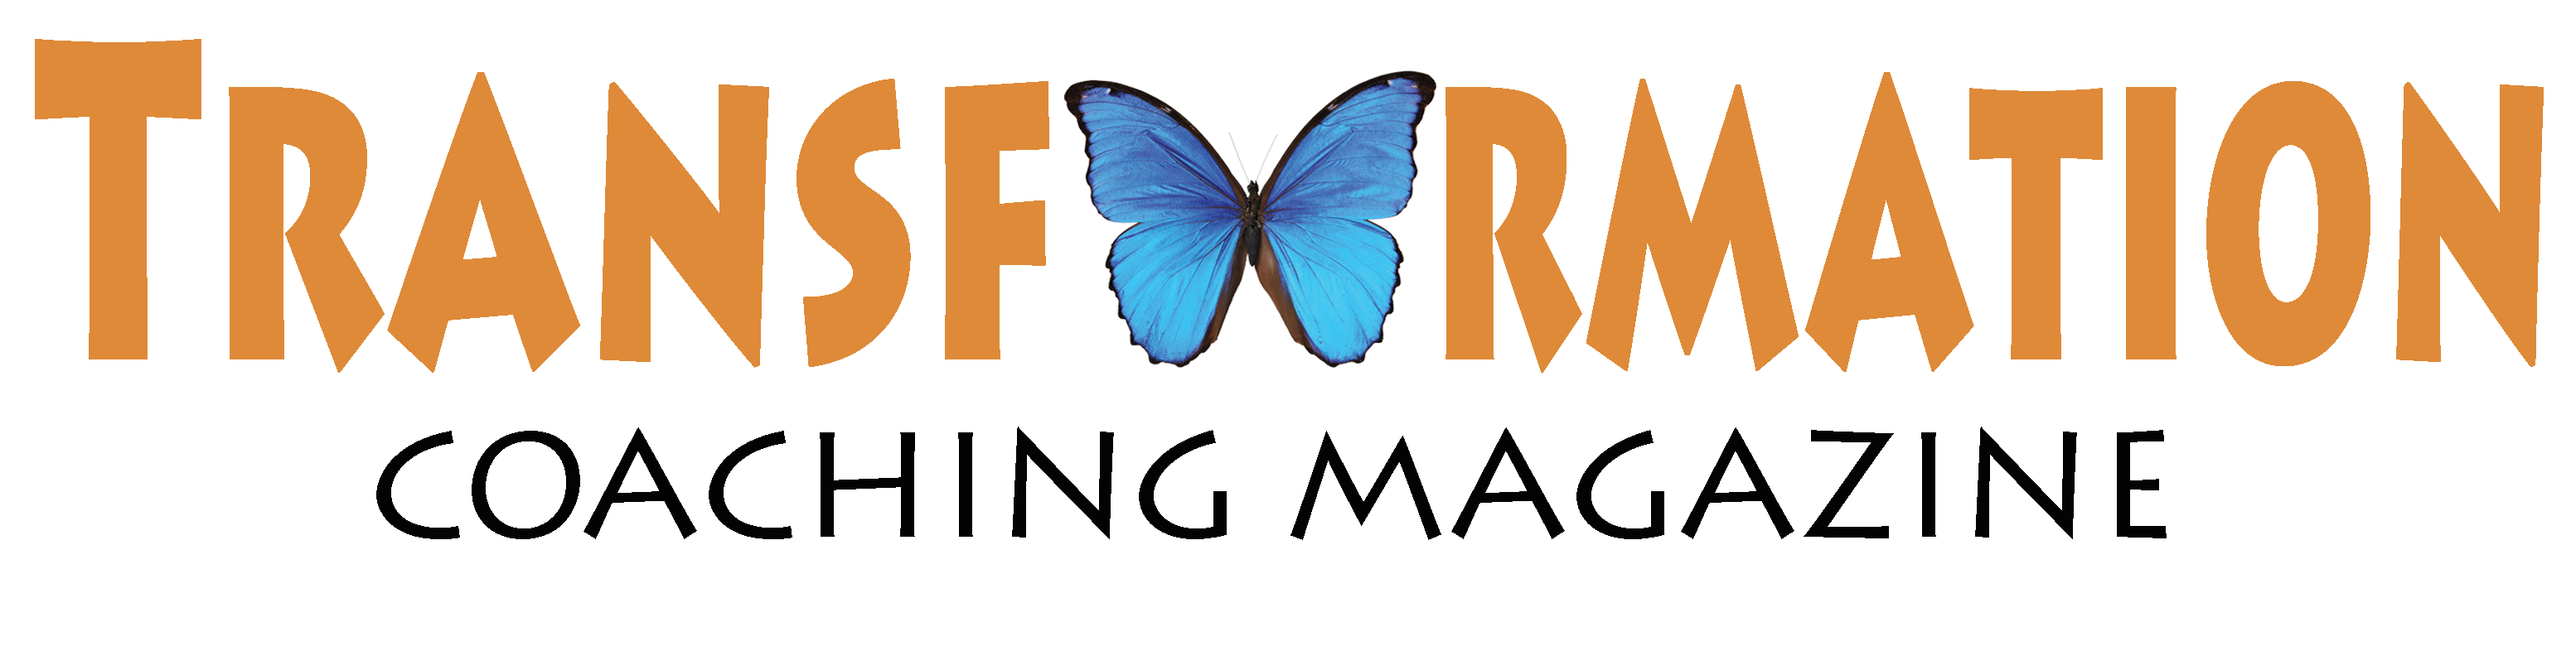 Magazine clipart mag. Transformation coaching for life